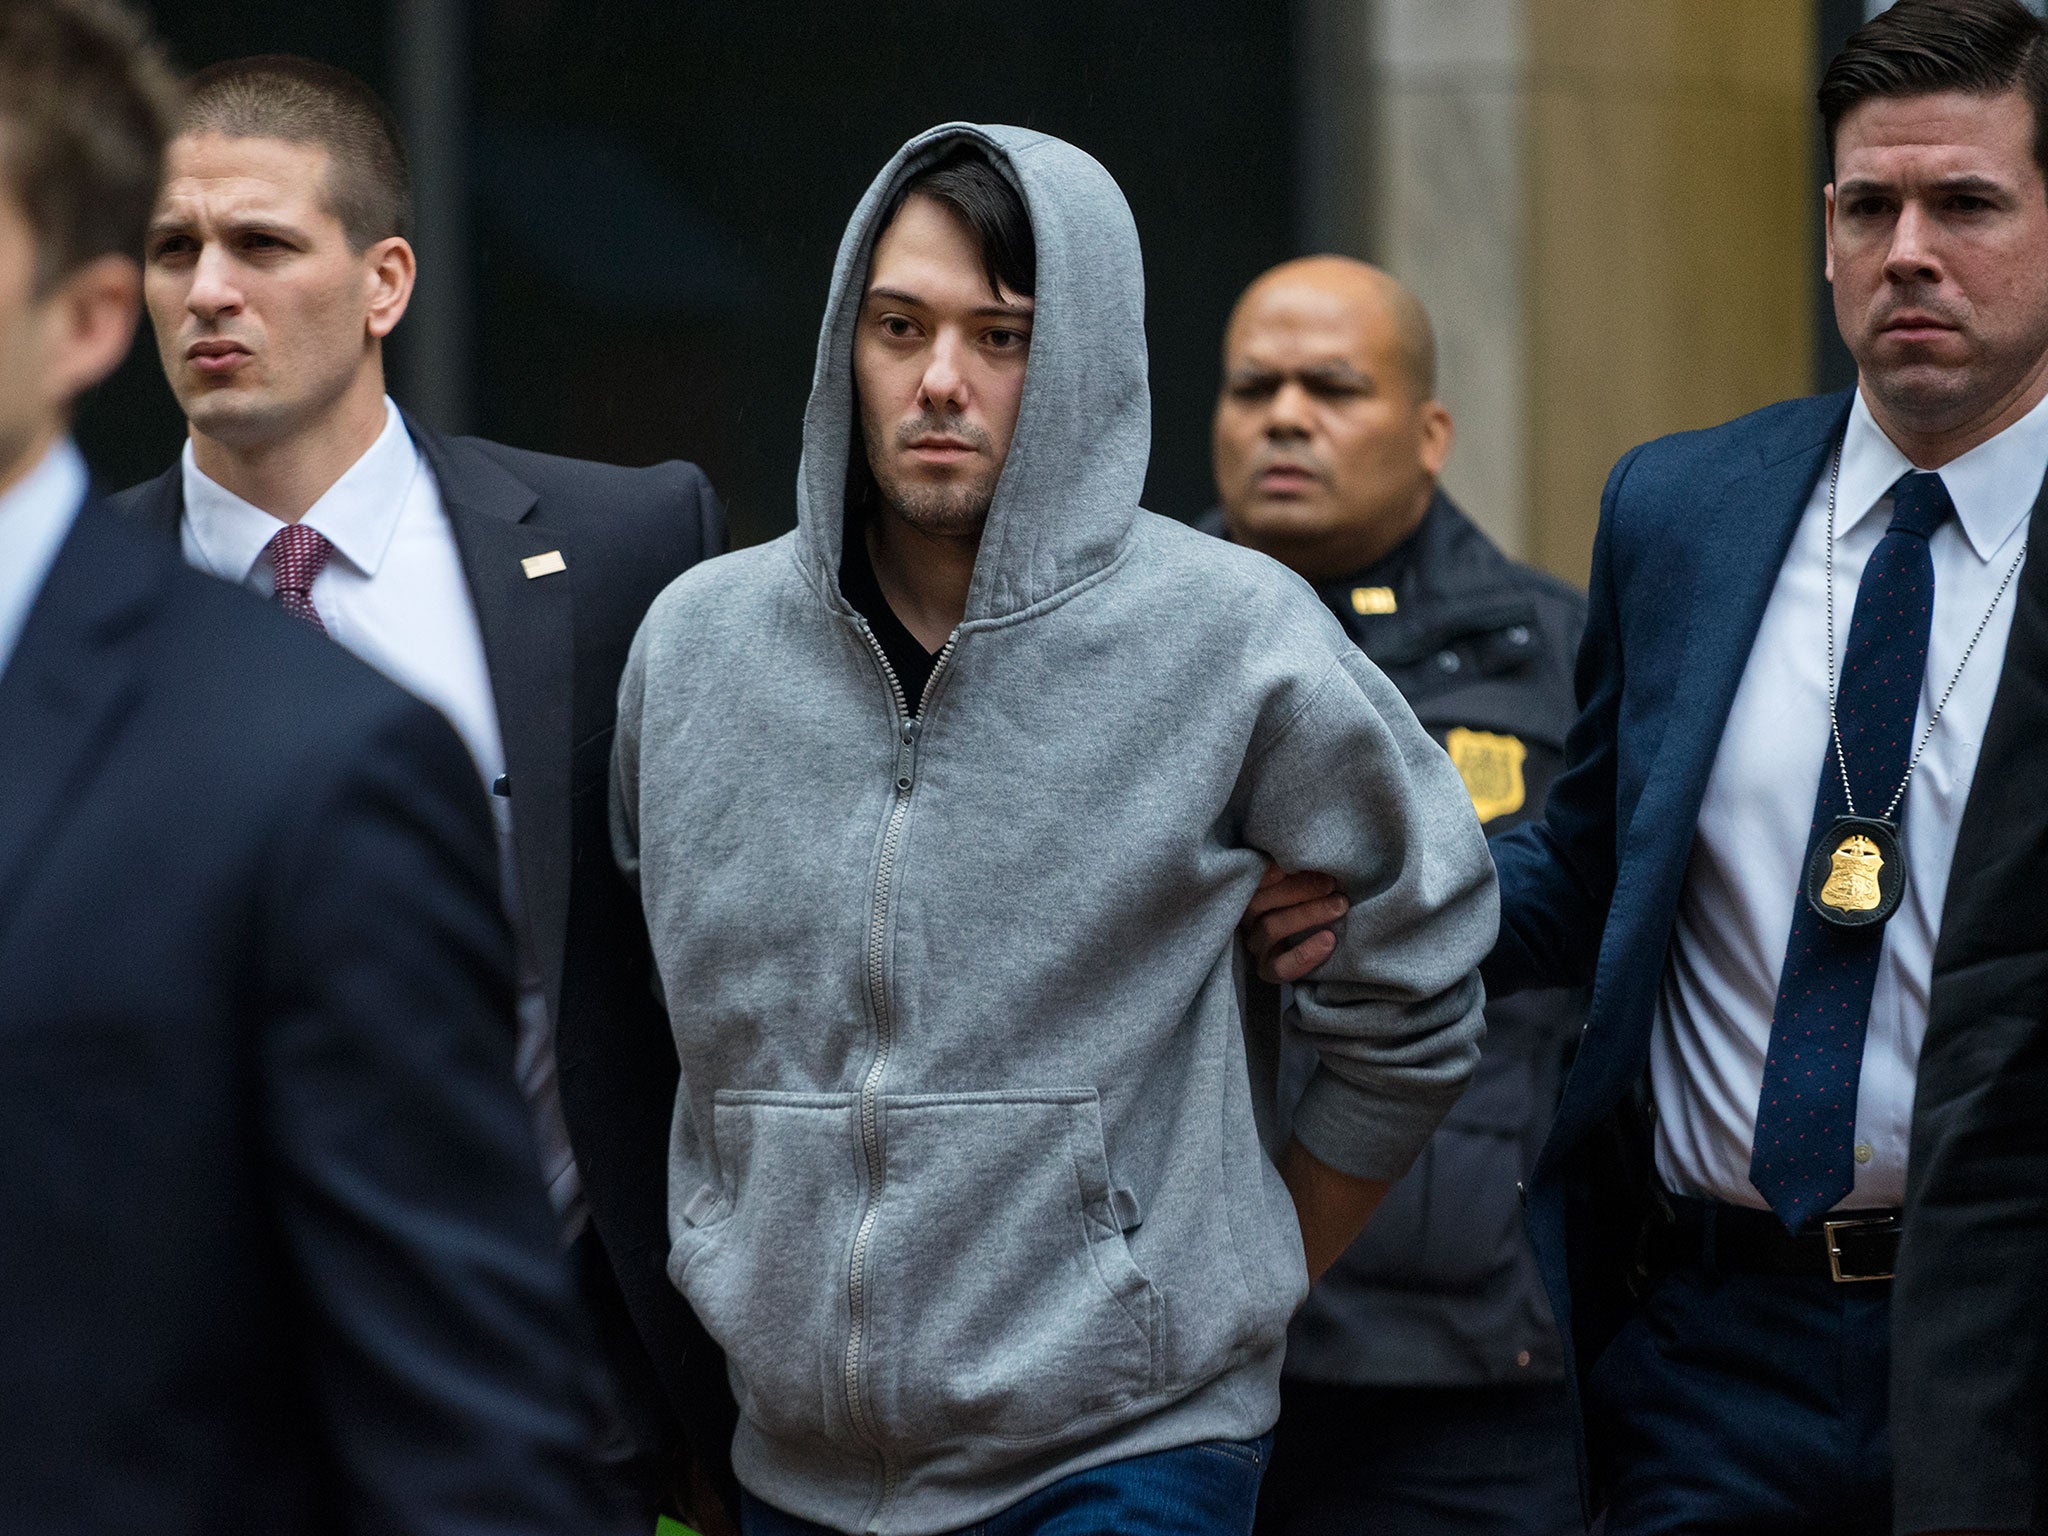 Martin Shkreli, the former hedge fund manager under fire for buying a pharmaceutical company and ratcheting up the price of a life-saving drug, is escorted by law enforcement agents in New York